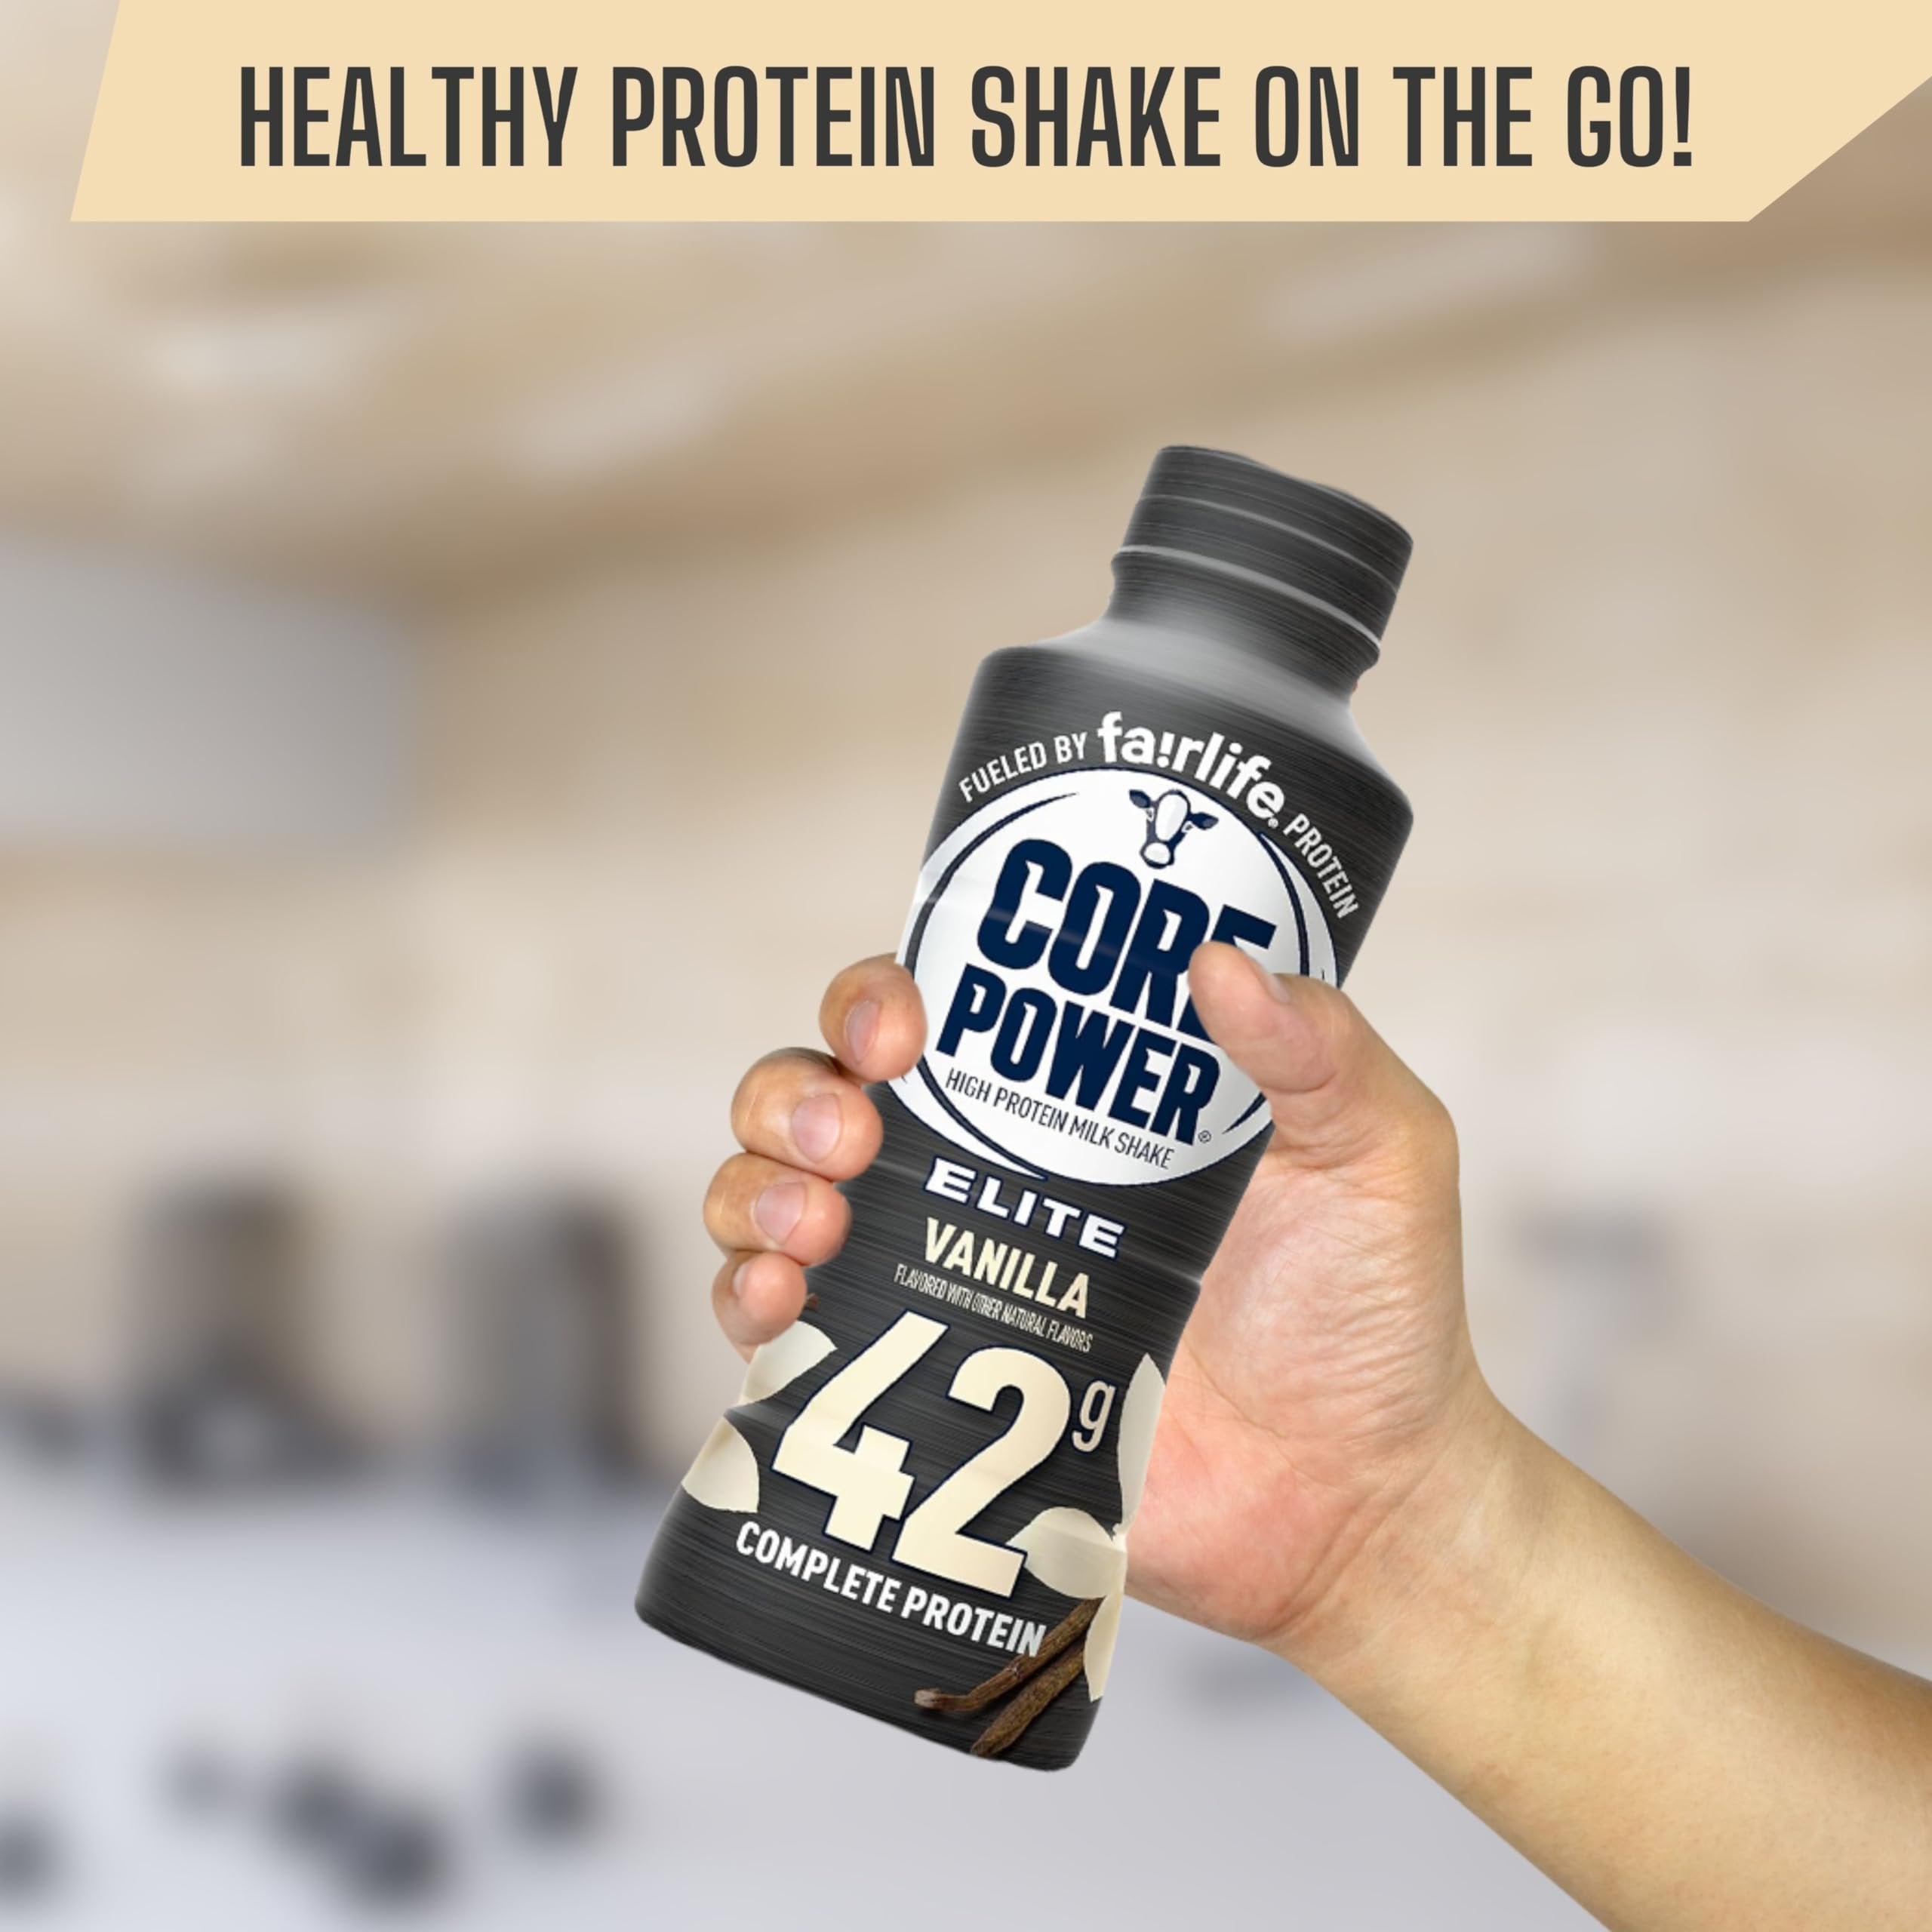 Core Power Fairlife Elite 42g High Protein Milk Shake - Kosher, Vanilla Flavor Protein Shake for Workout Recovery - 14 Fl Oz (Pack of 12) & Multi-Purpose Key Chain